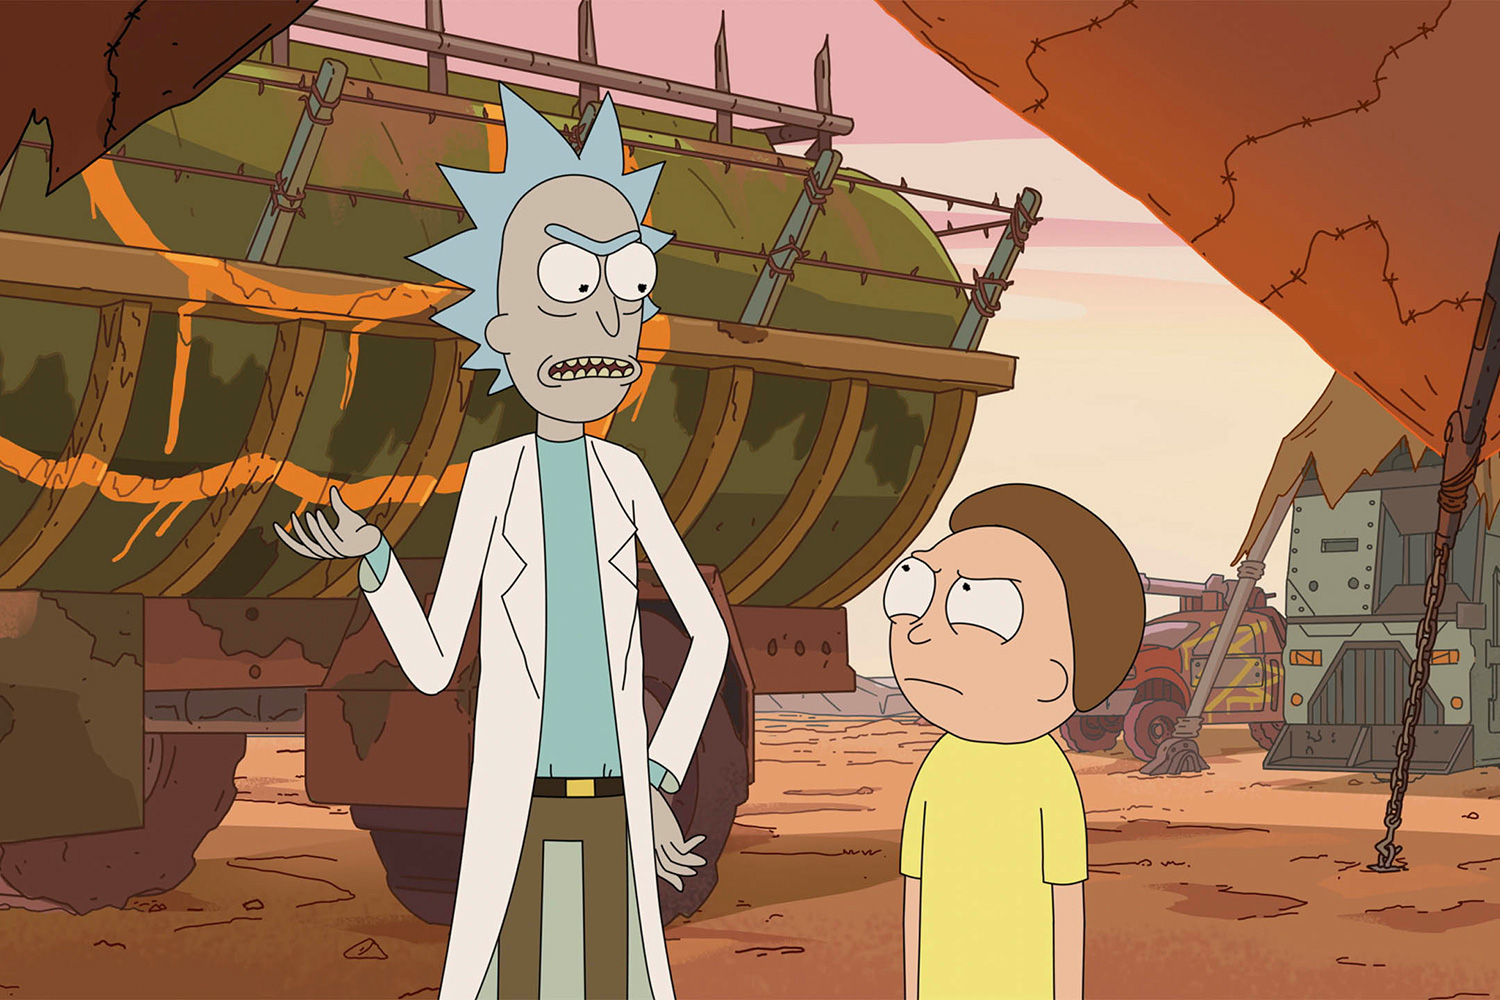 How to Watch the Rick and Morty Season 4 Premiere Online Free